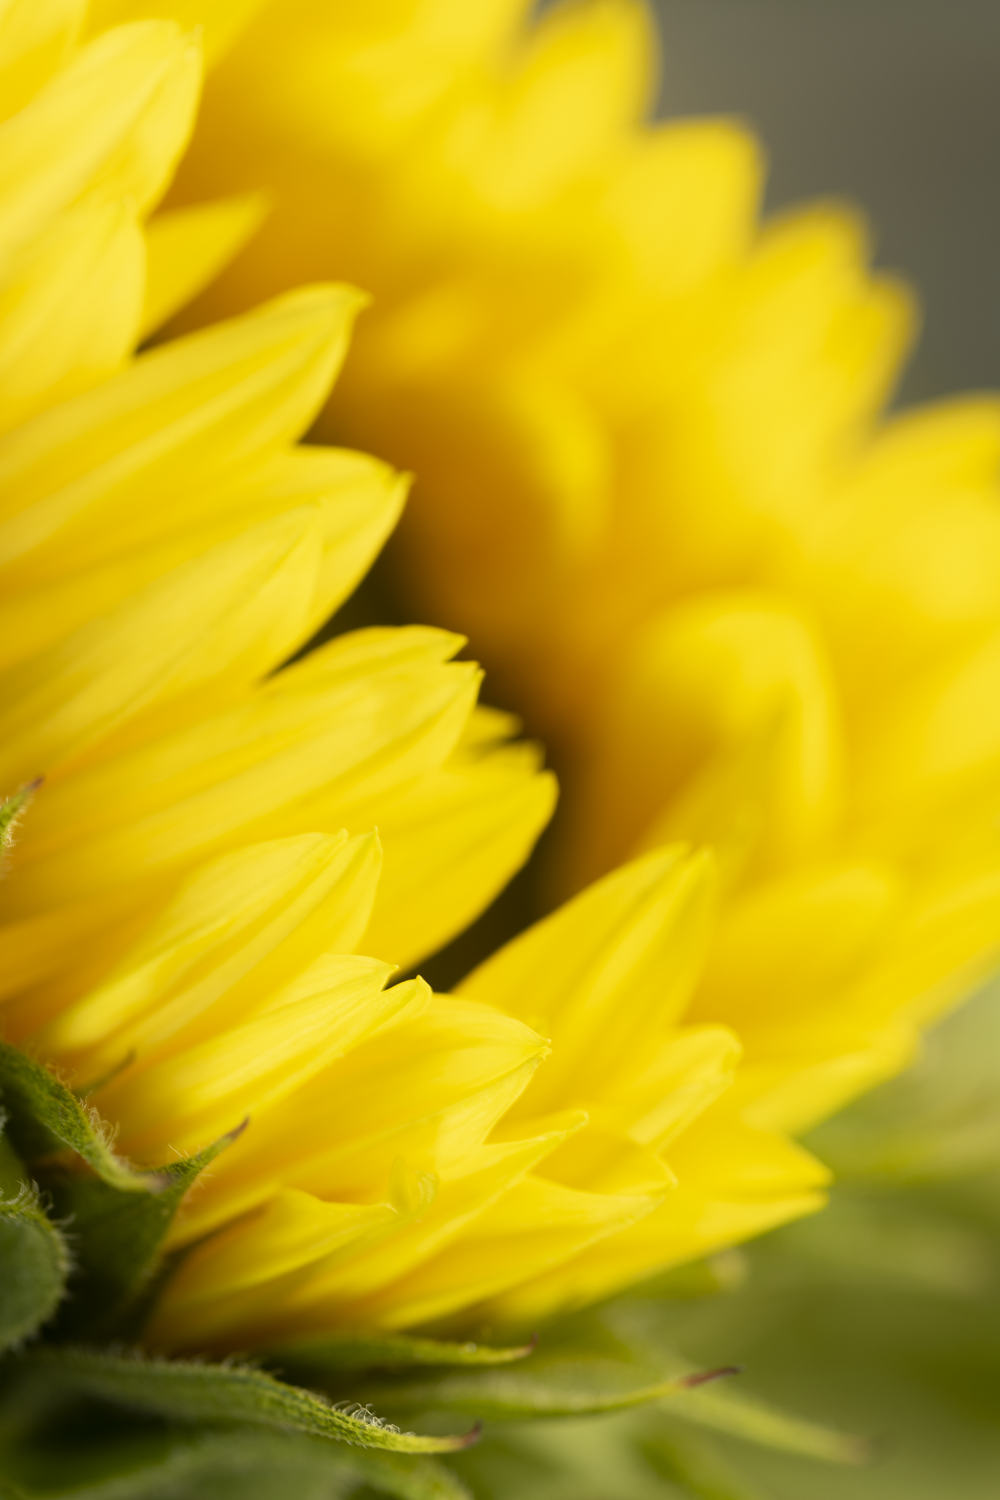 Colour photograph depicting a close-up of a yellow sunflower.